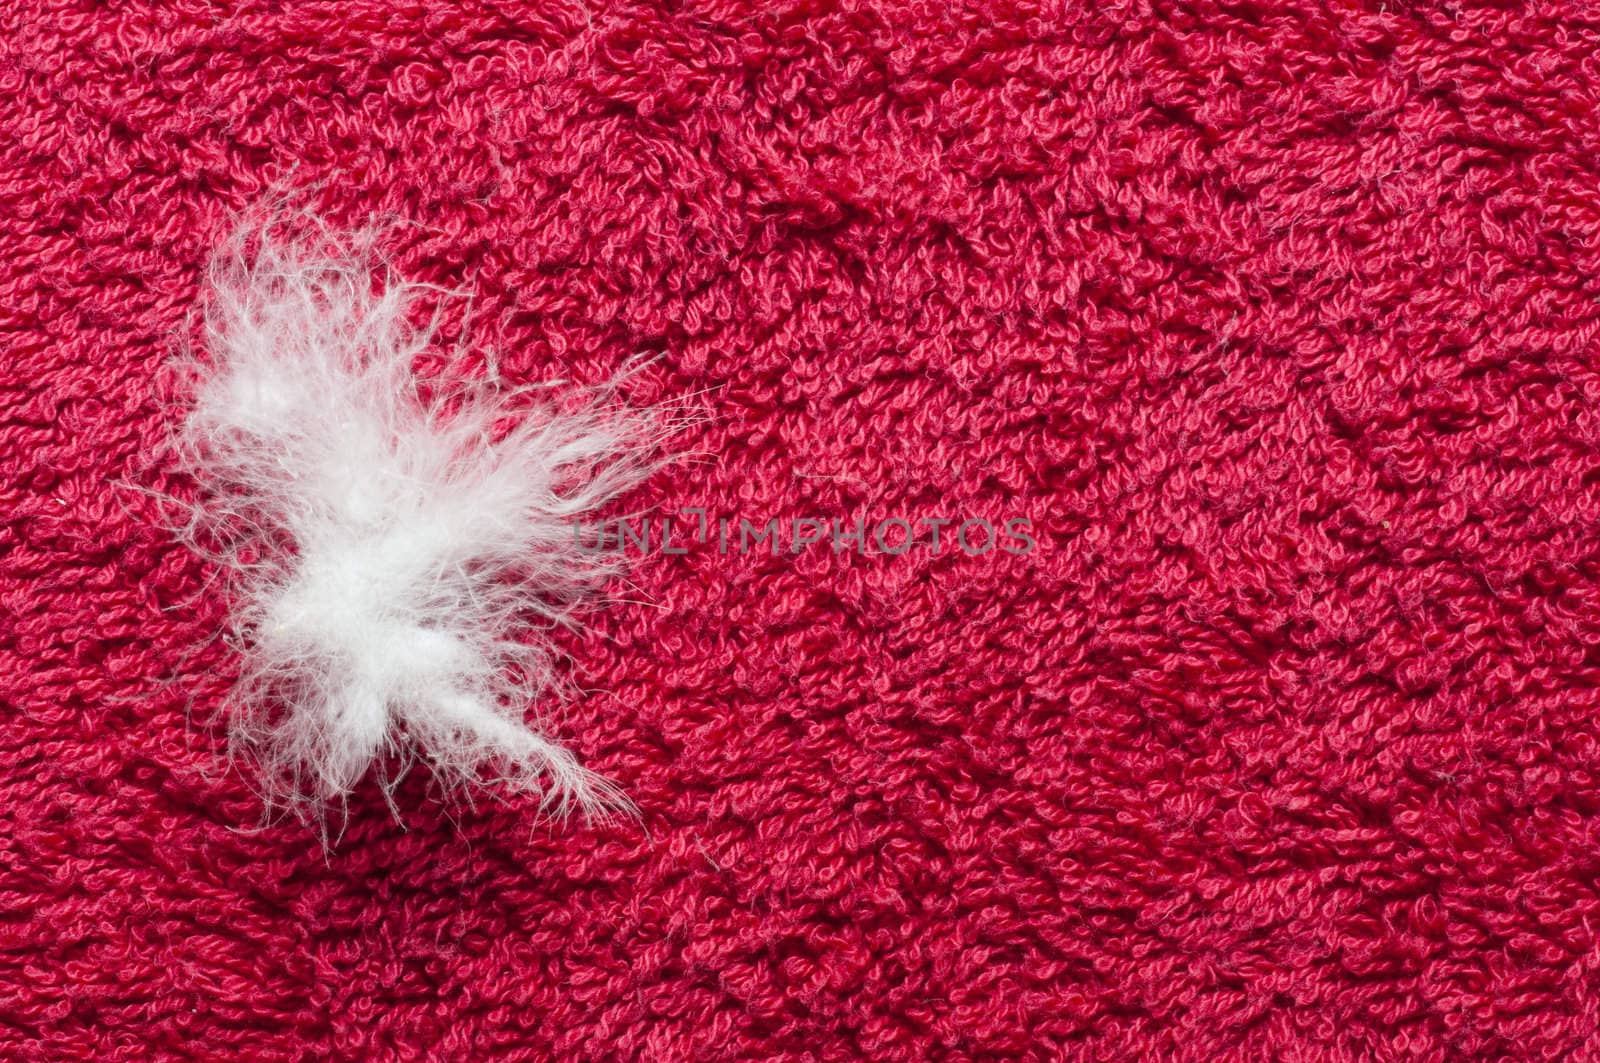 Goose down on red  sponge cloth